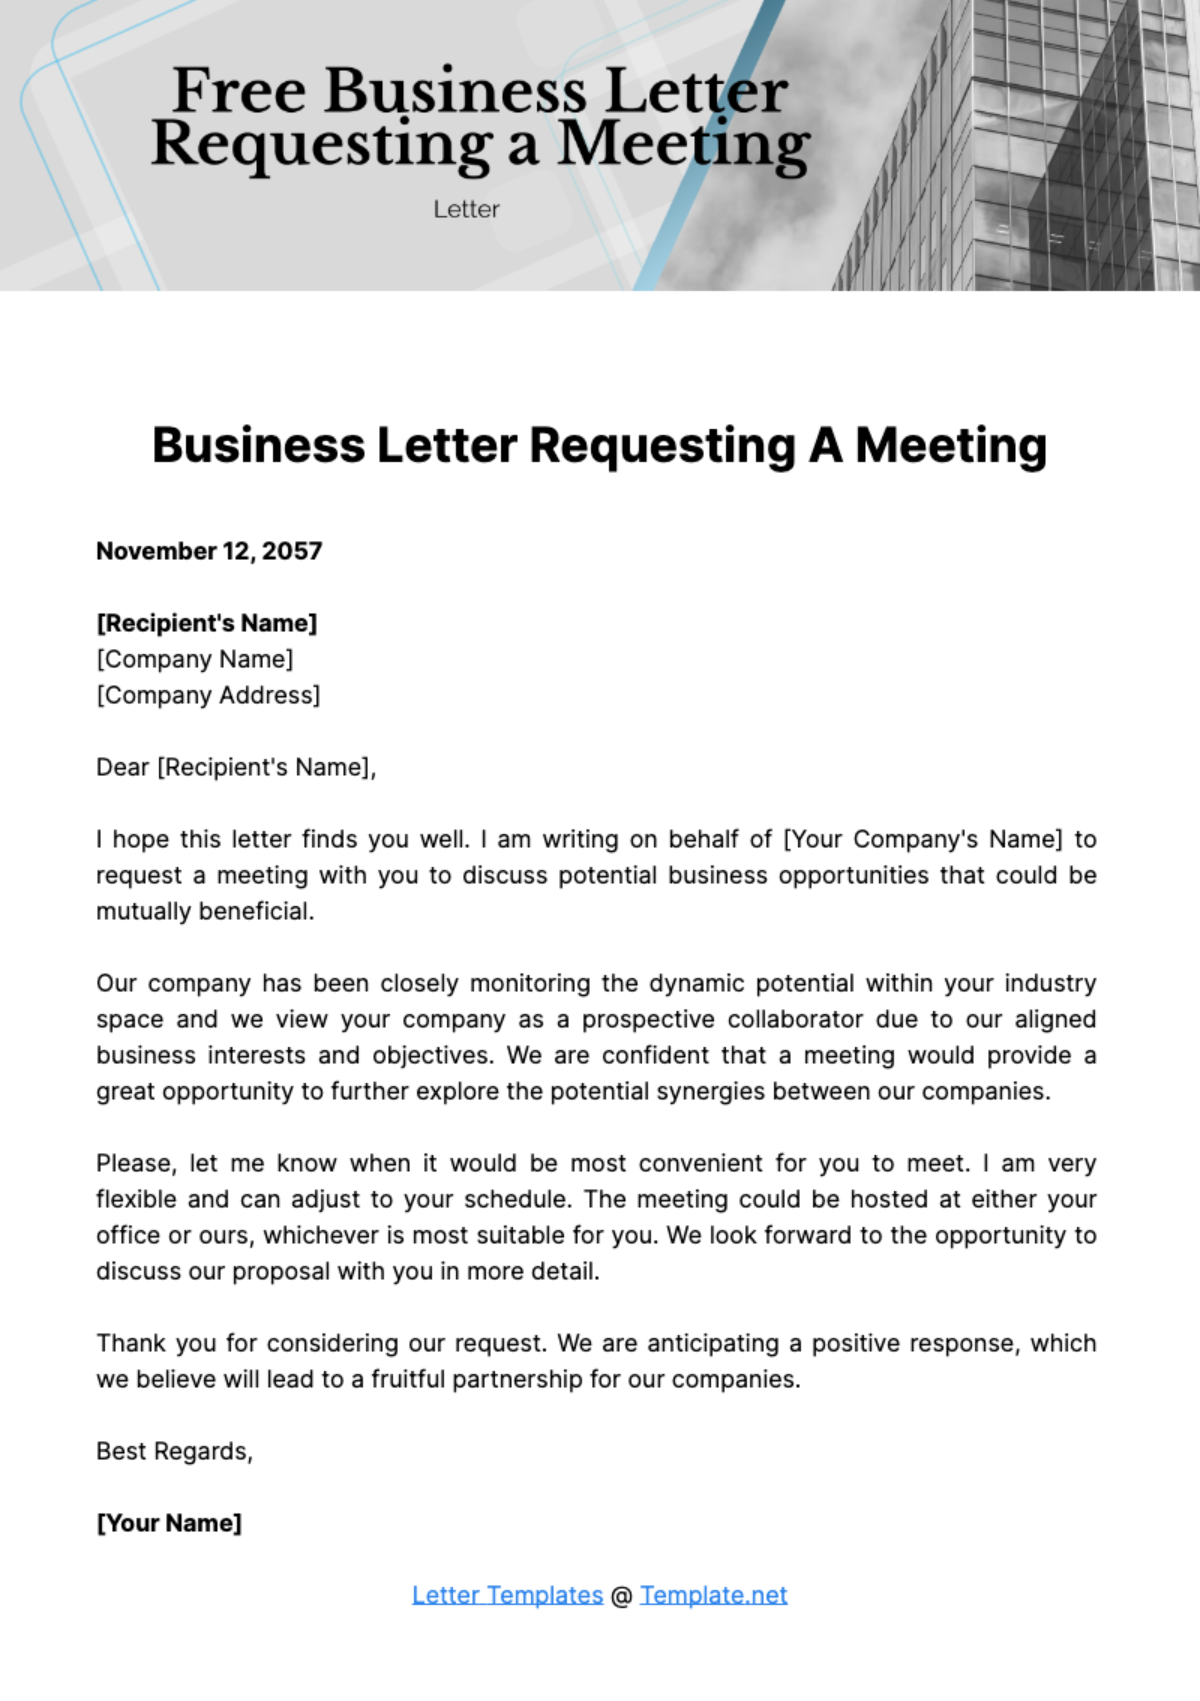 Free Business Letter Requesting a Meeting Template